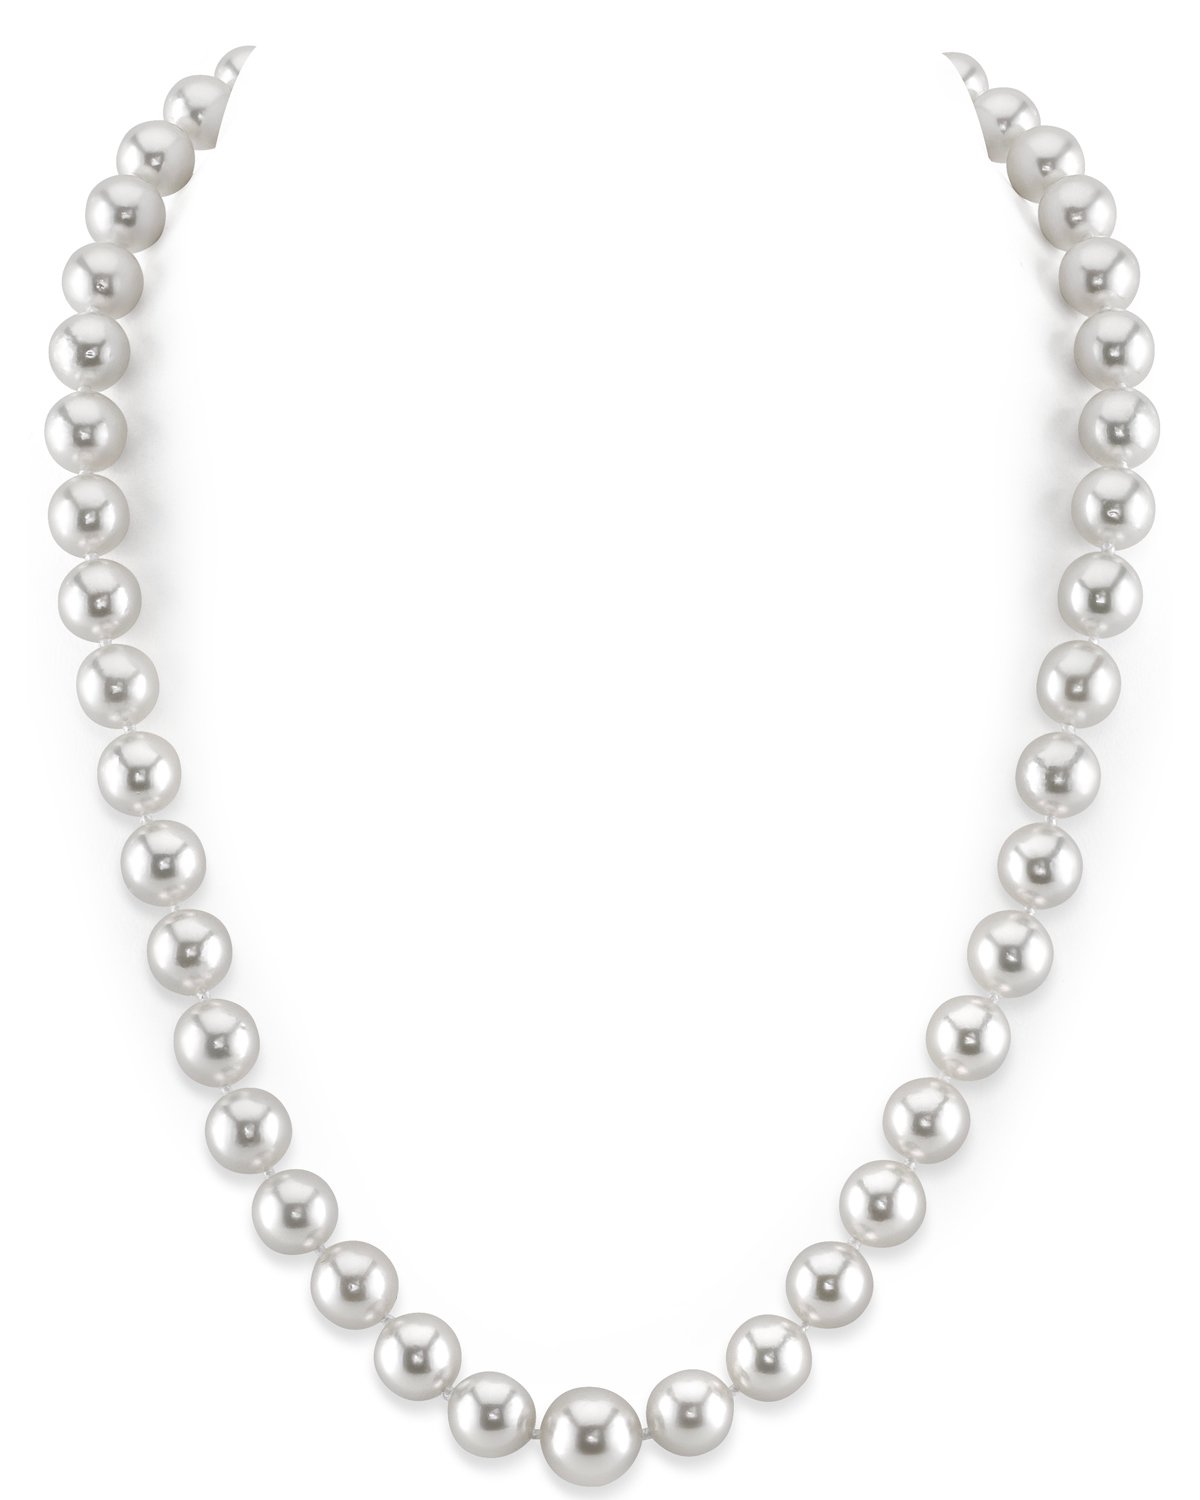 8-10mm White South Sea Pearl Necklace - AAA Quality